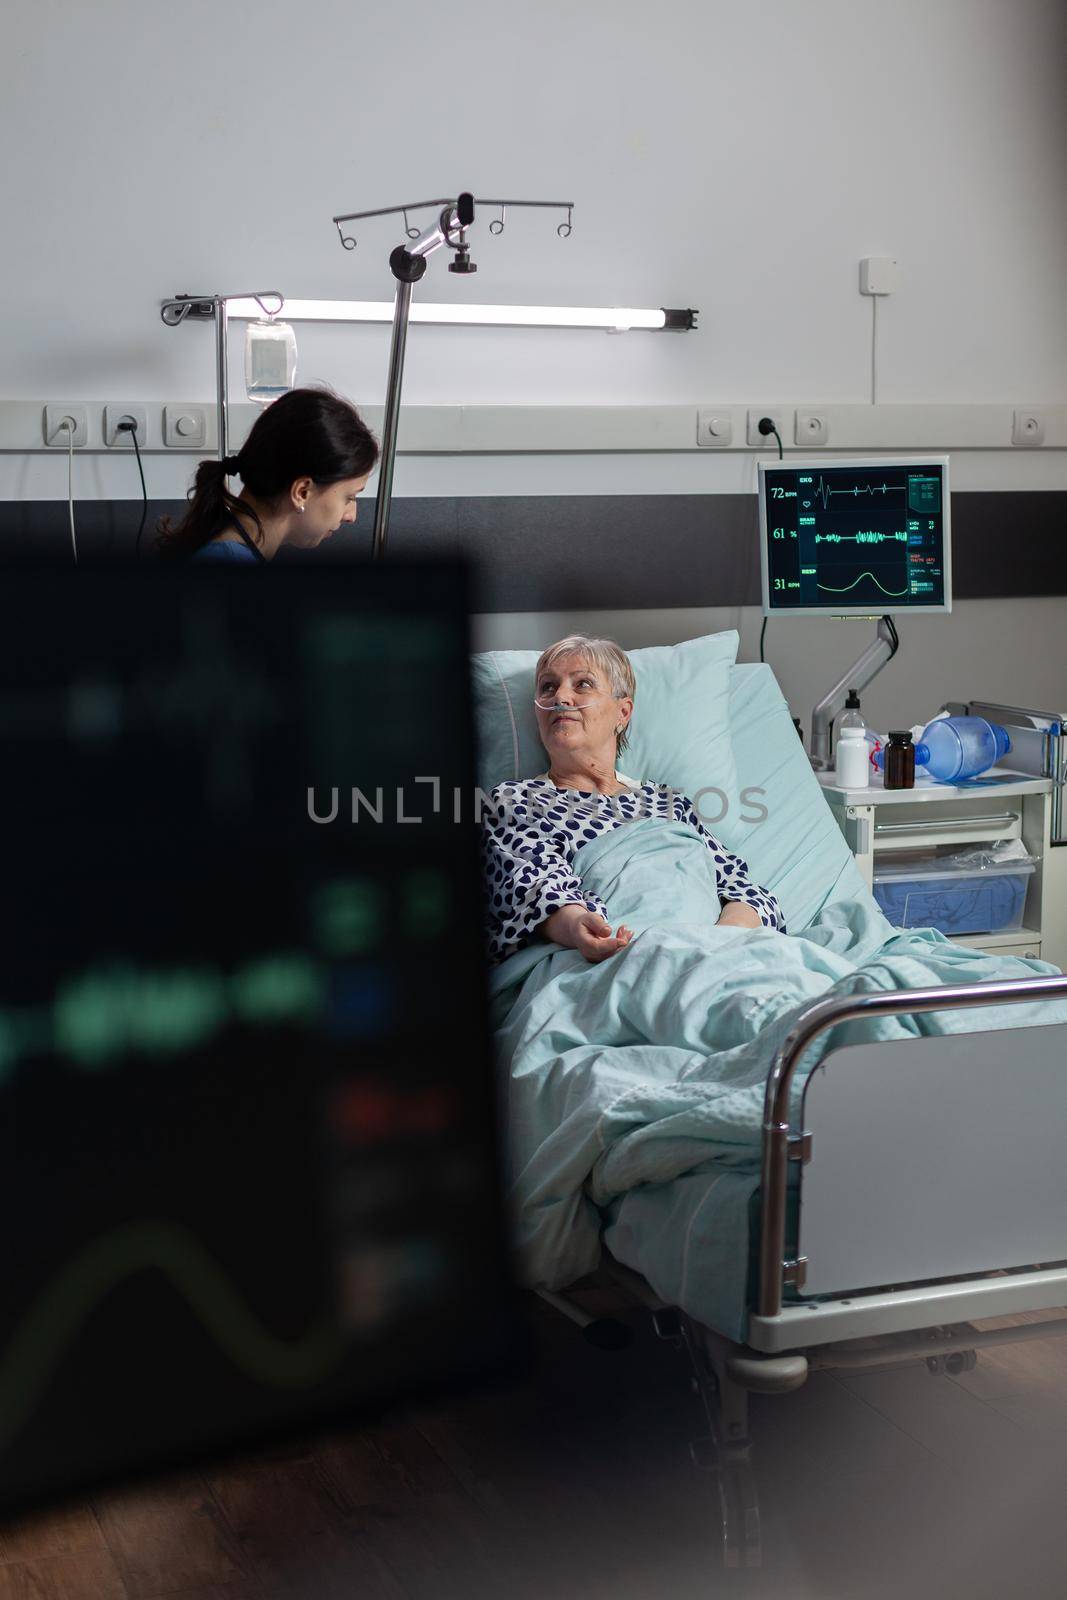 Medical nurse in scrubs showing compassion to senior woman patient, laying in hospital bed breathing with help from oxygen mask, getting intravenous medicine from iv drip bag.